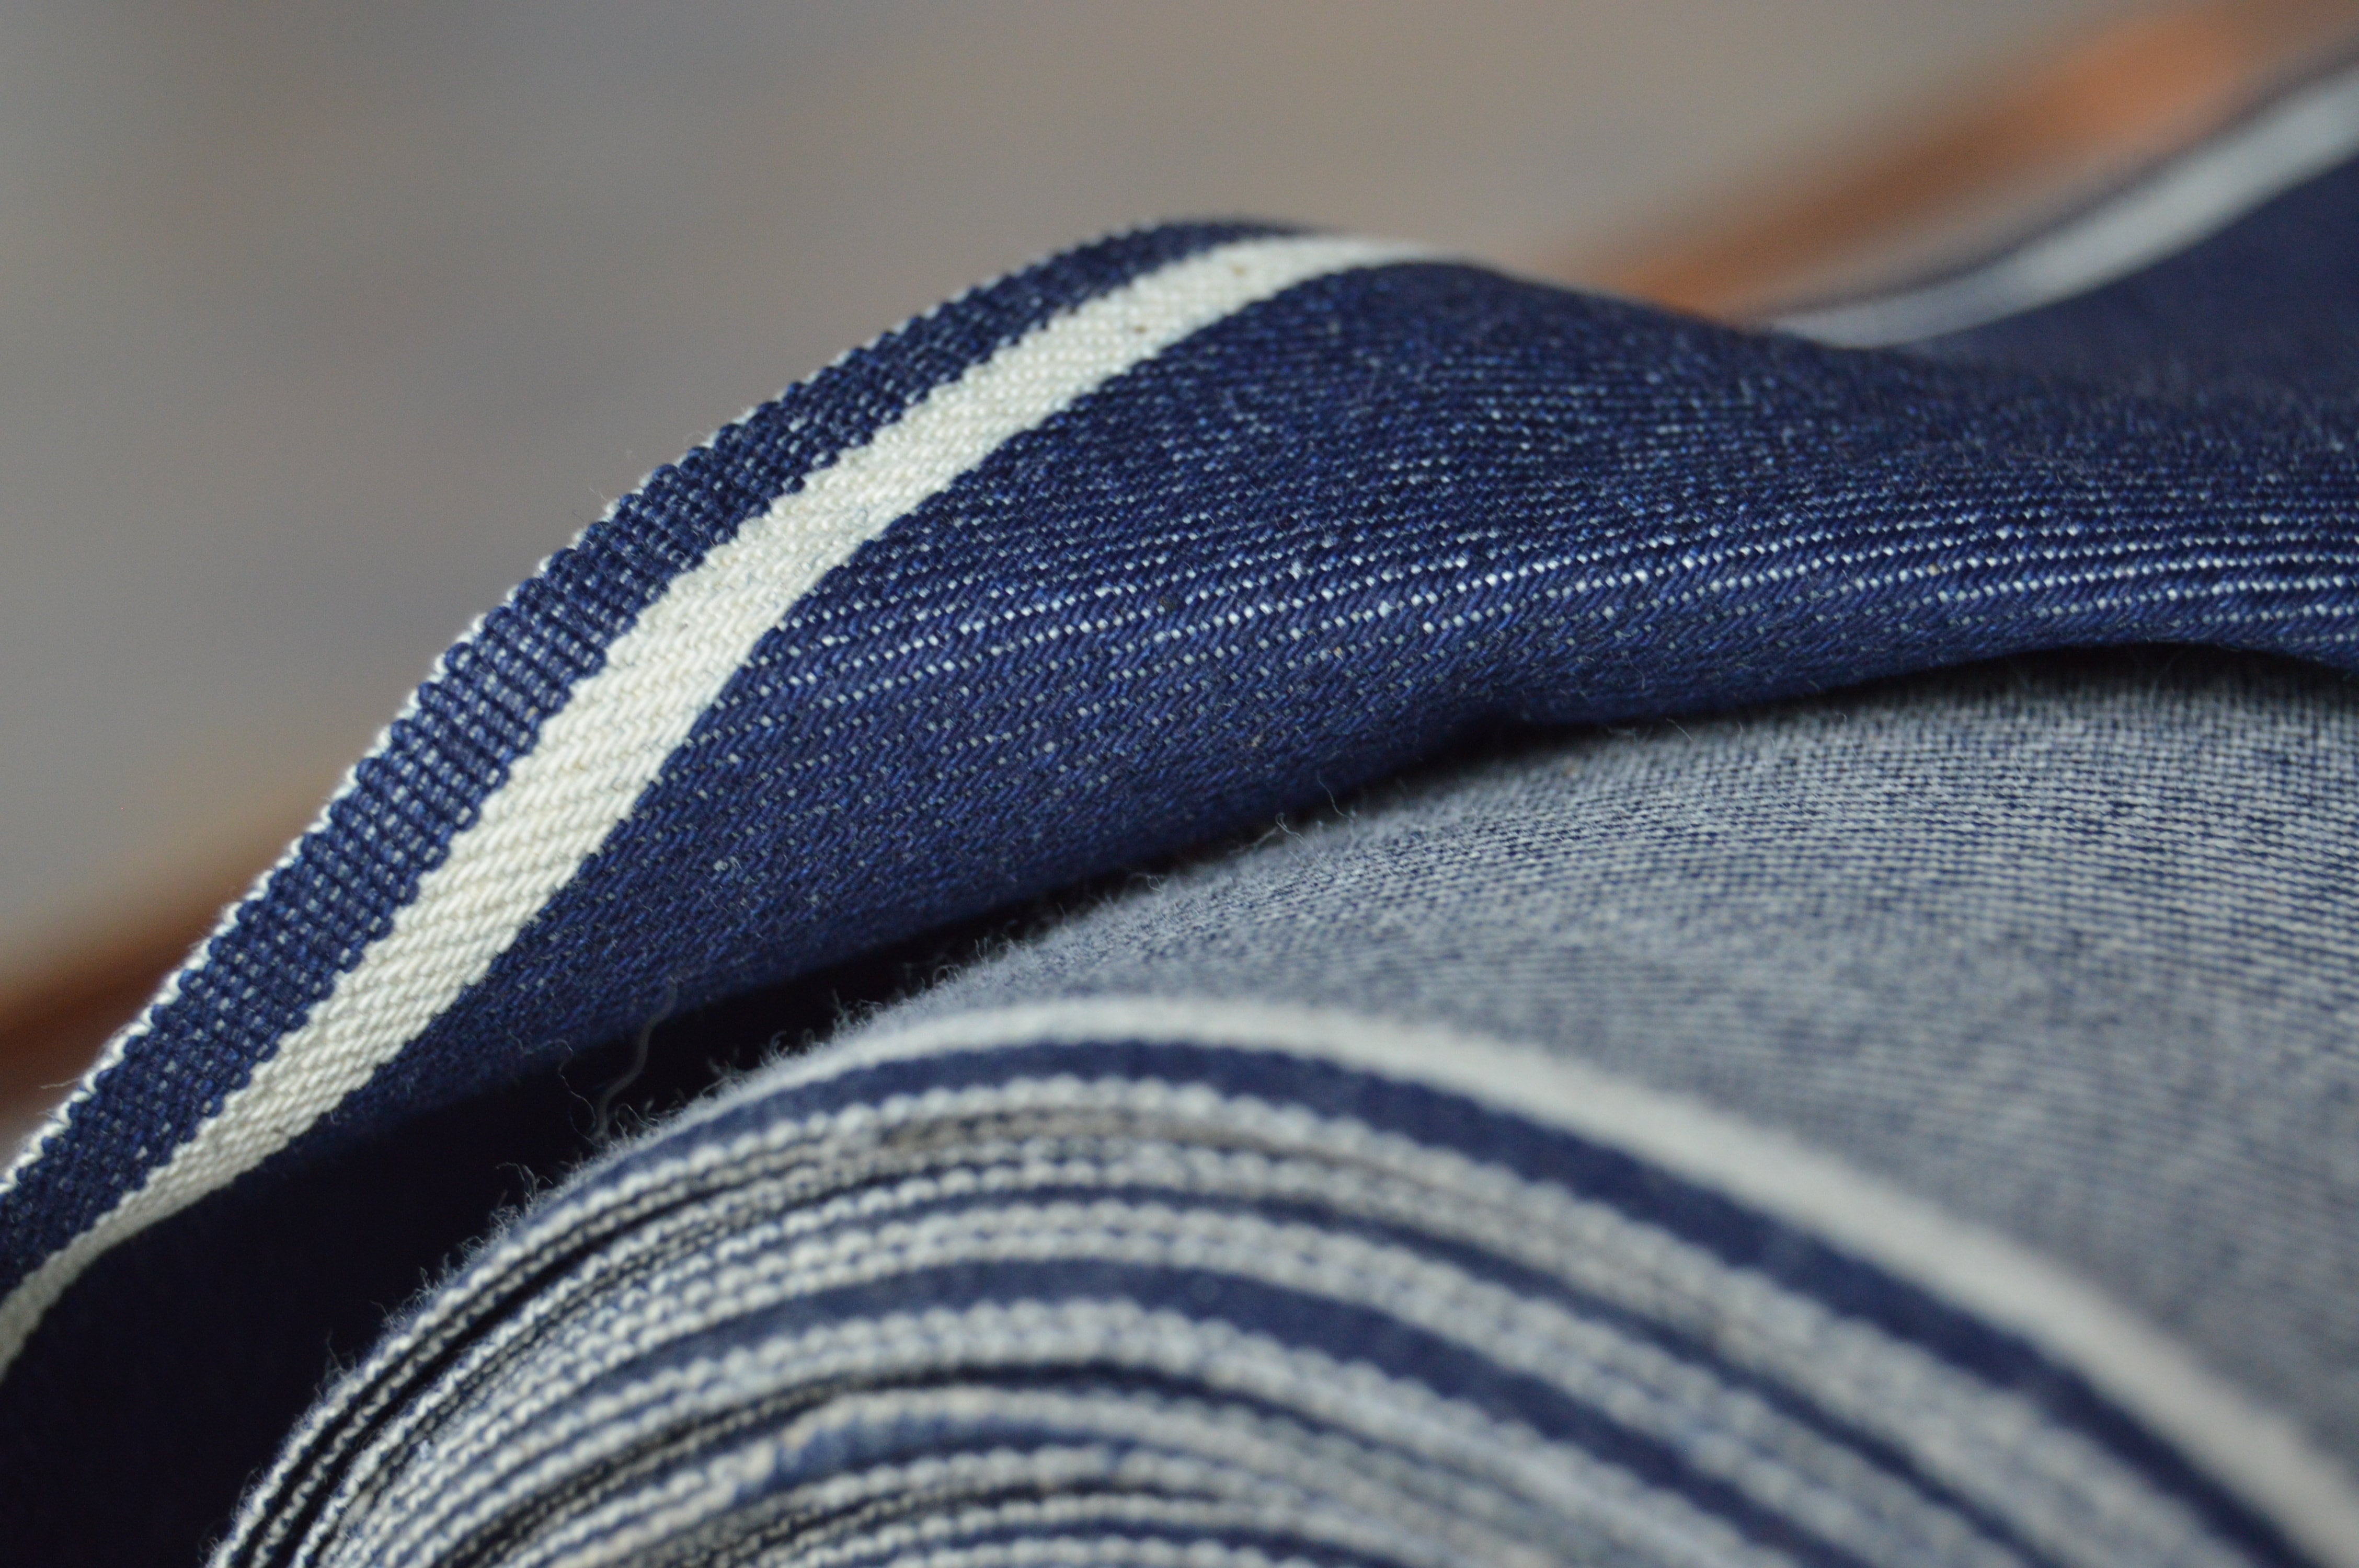 Aging your raw denim – The School Of Levin